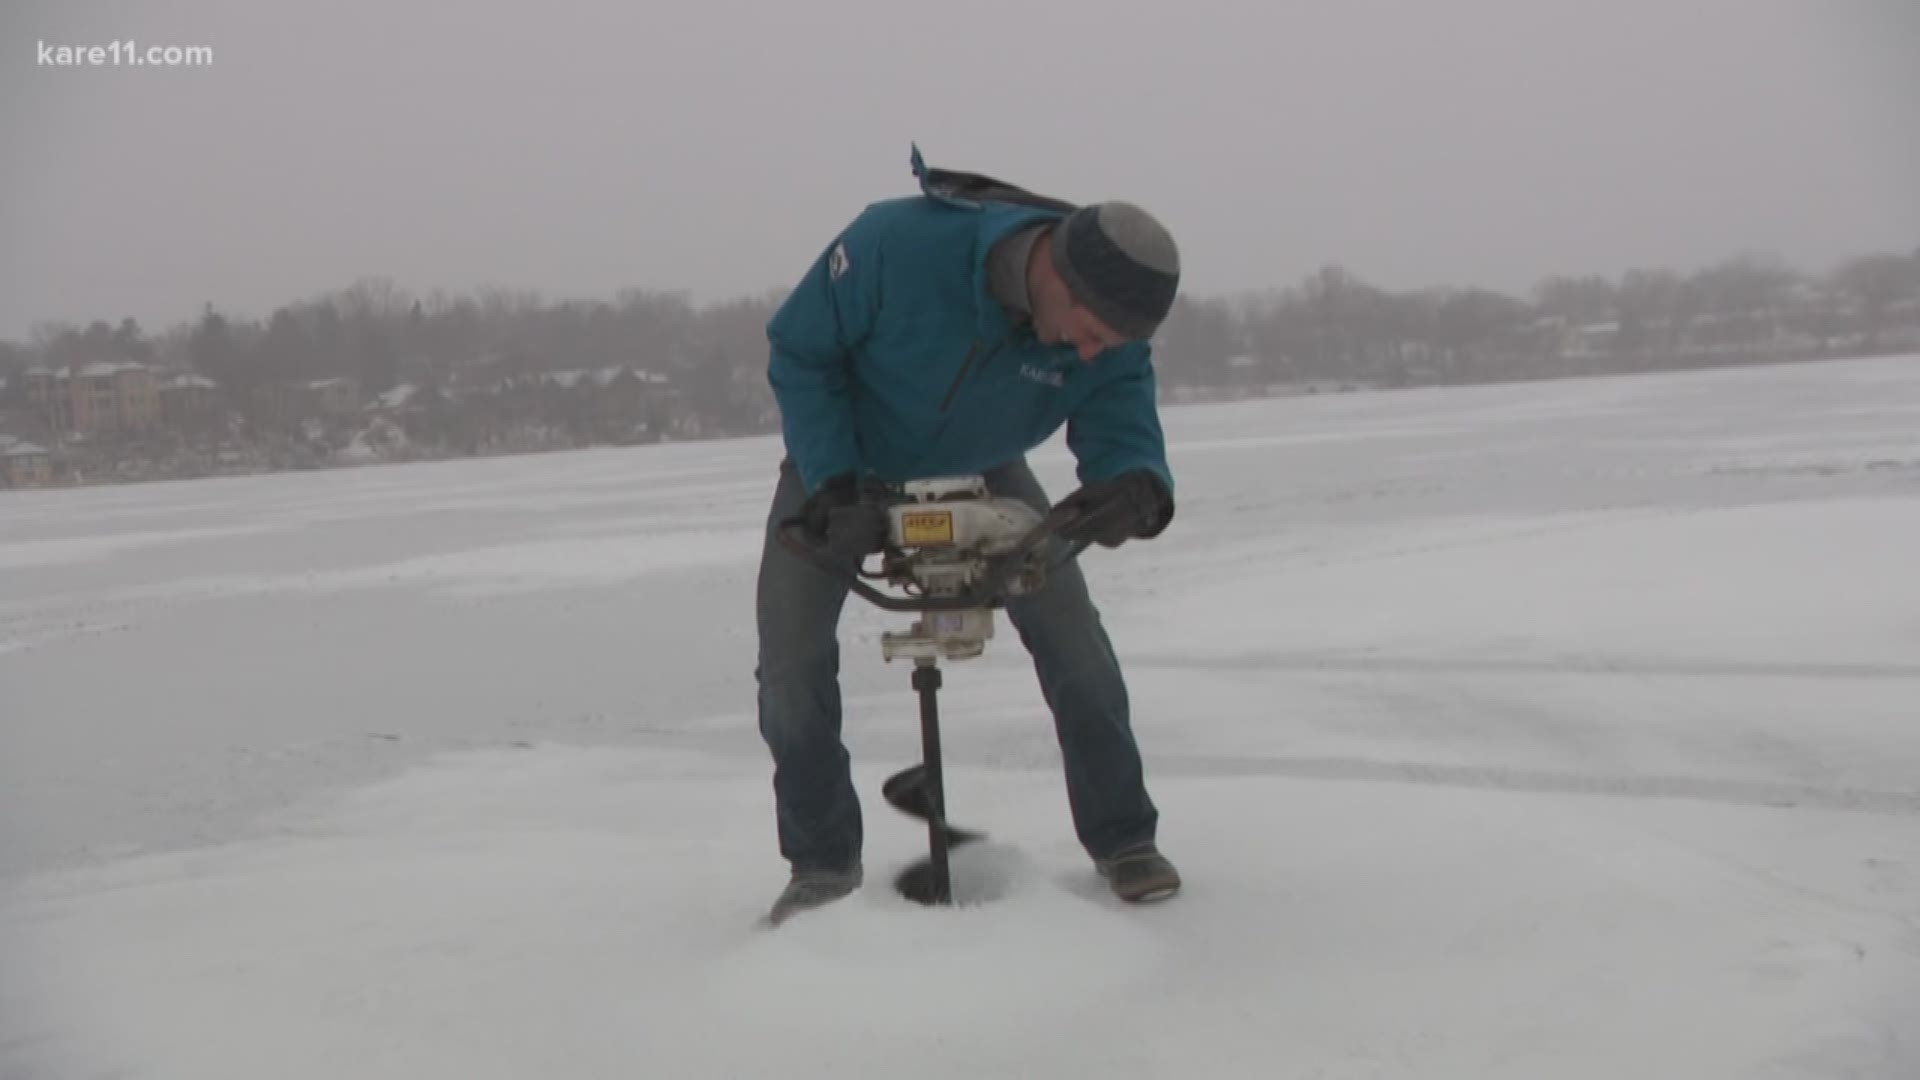 Kris Laudien braves the frigid temperatures and wicked wind on Lake Owasso for some ice fishing. https://kare11.tv/2GuLkWH